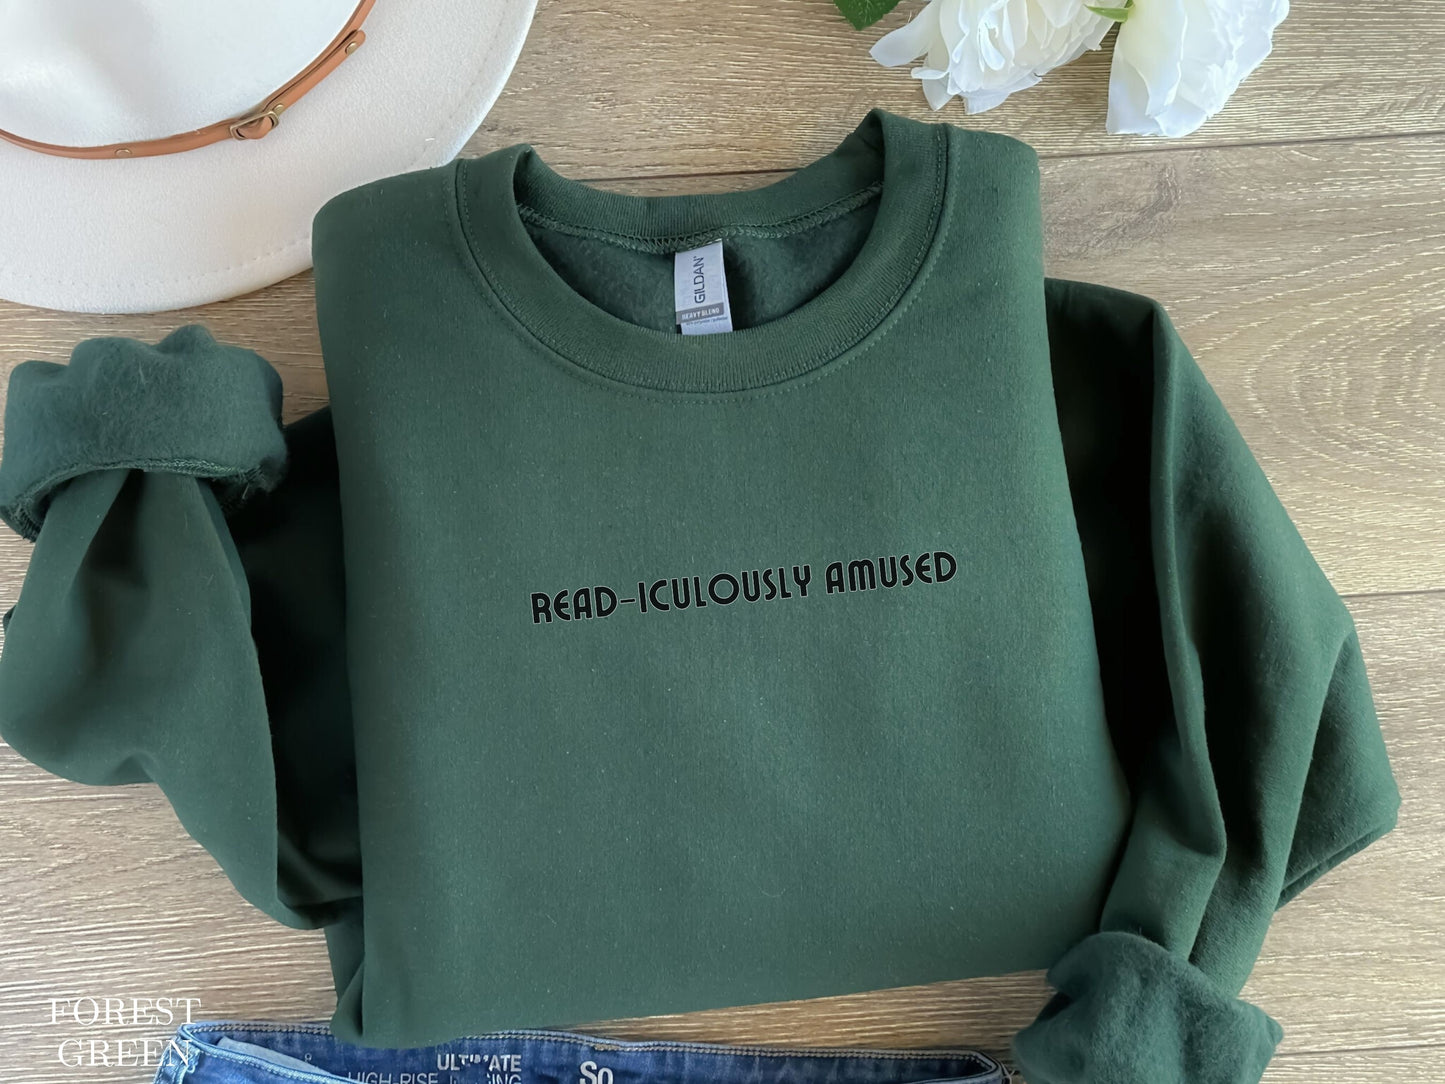 Humor-infused Reader Quote Sweatshirt: Perfect Gift for Book Lovers, Cozy Jumper for Avid Readers, with a Witty Twist